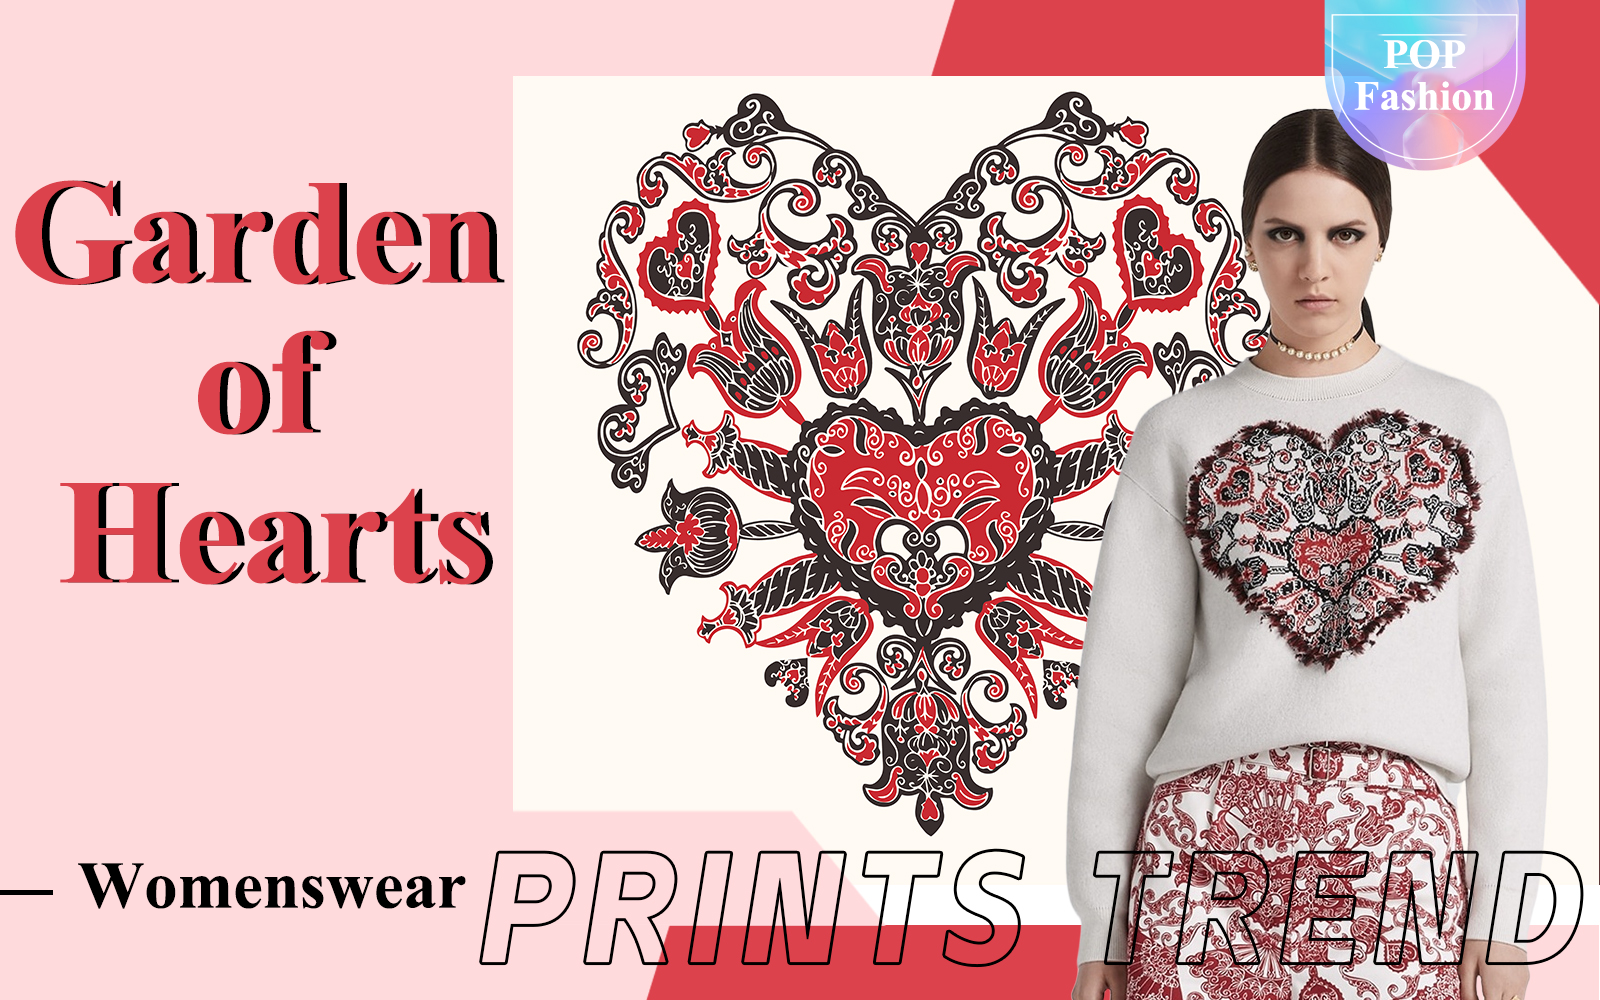 Garden of Hearts -- The Fast-response Pattern Trend for Womenswear